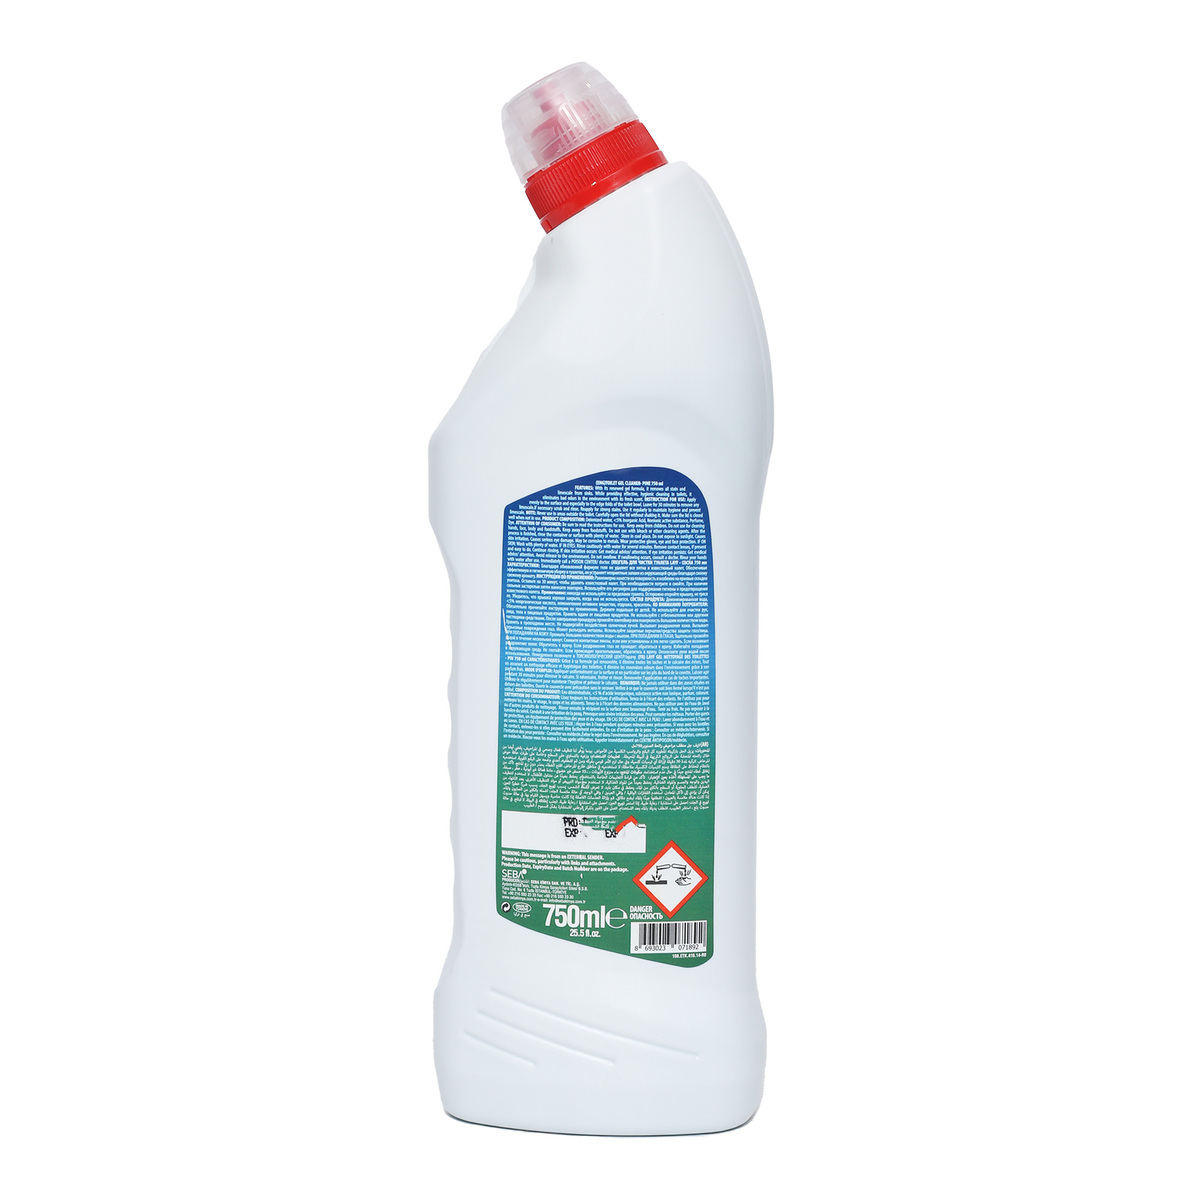 Layf Toilet Cleaner Pine 750 ml